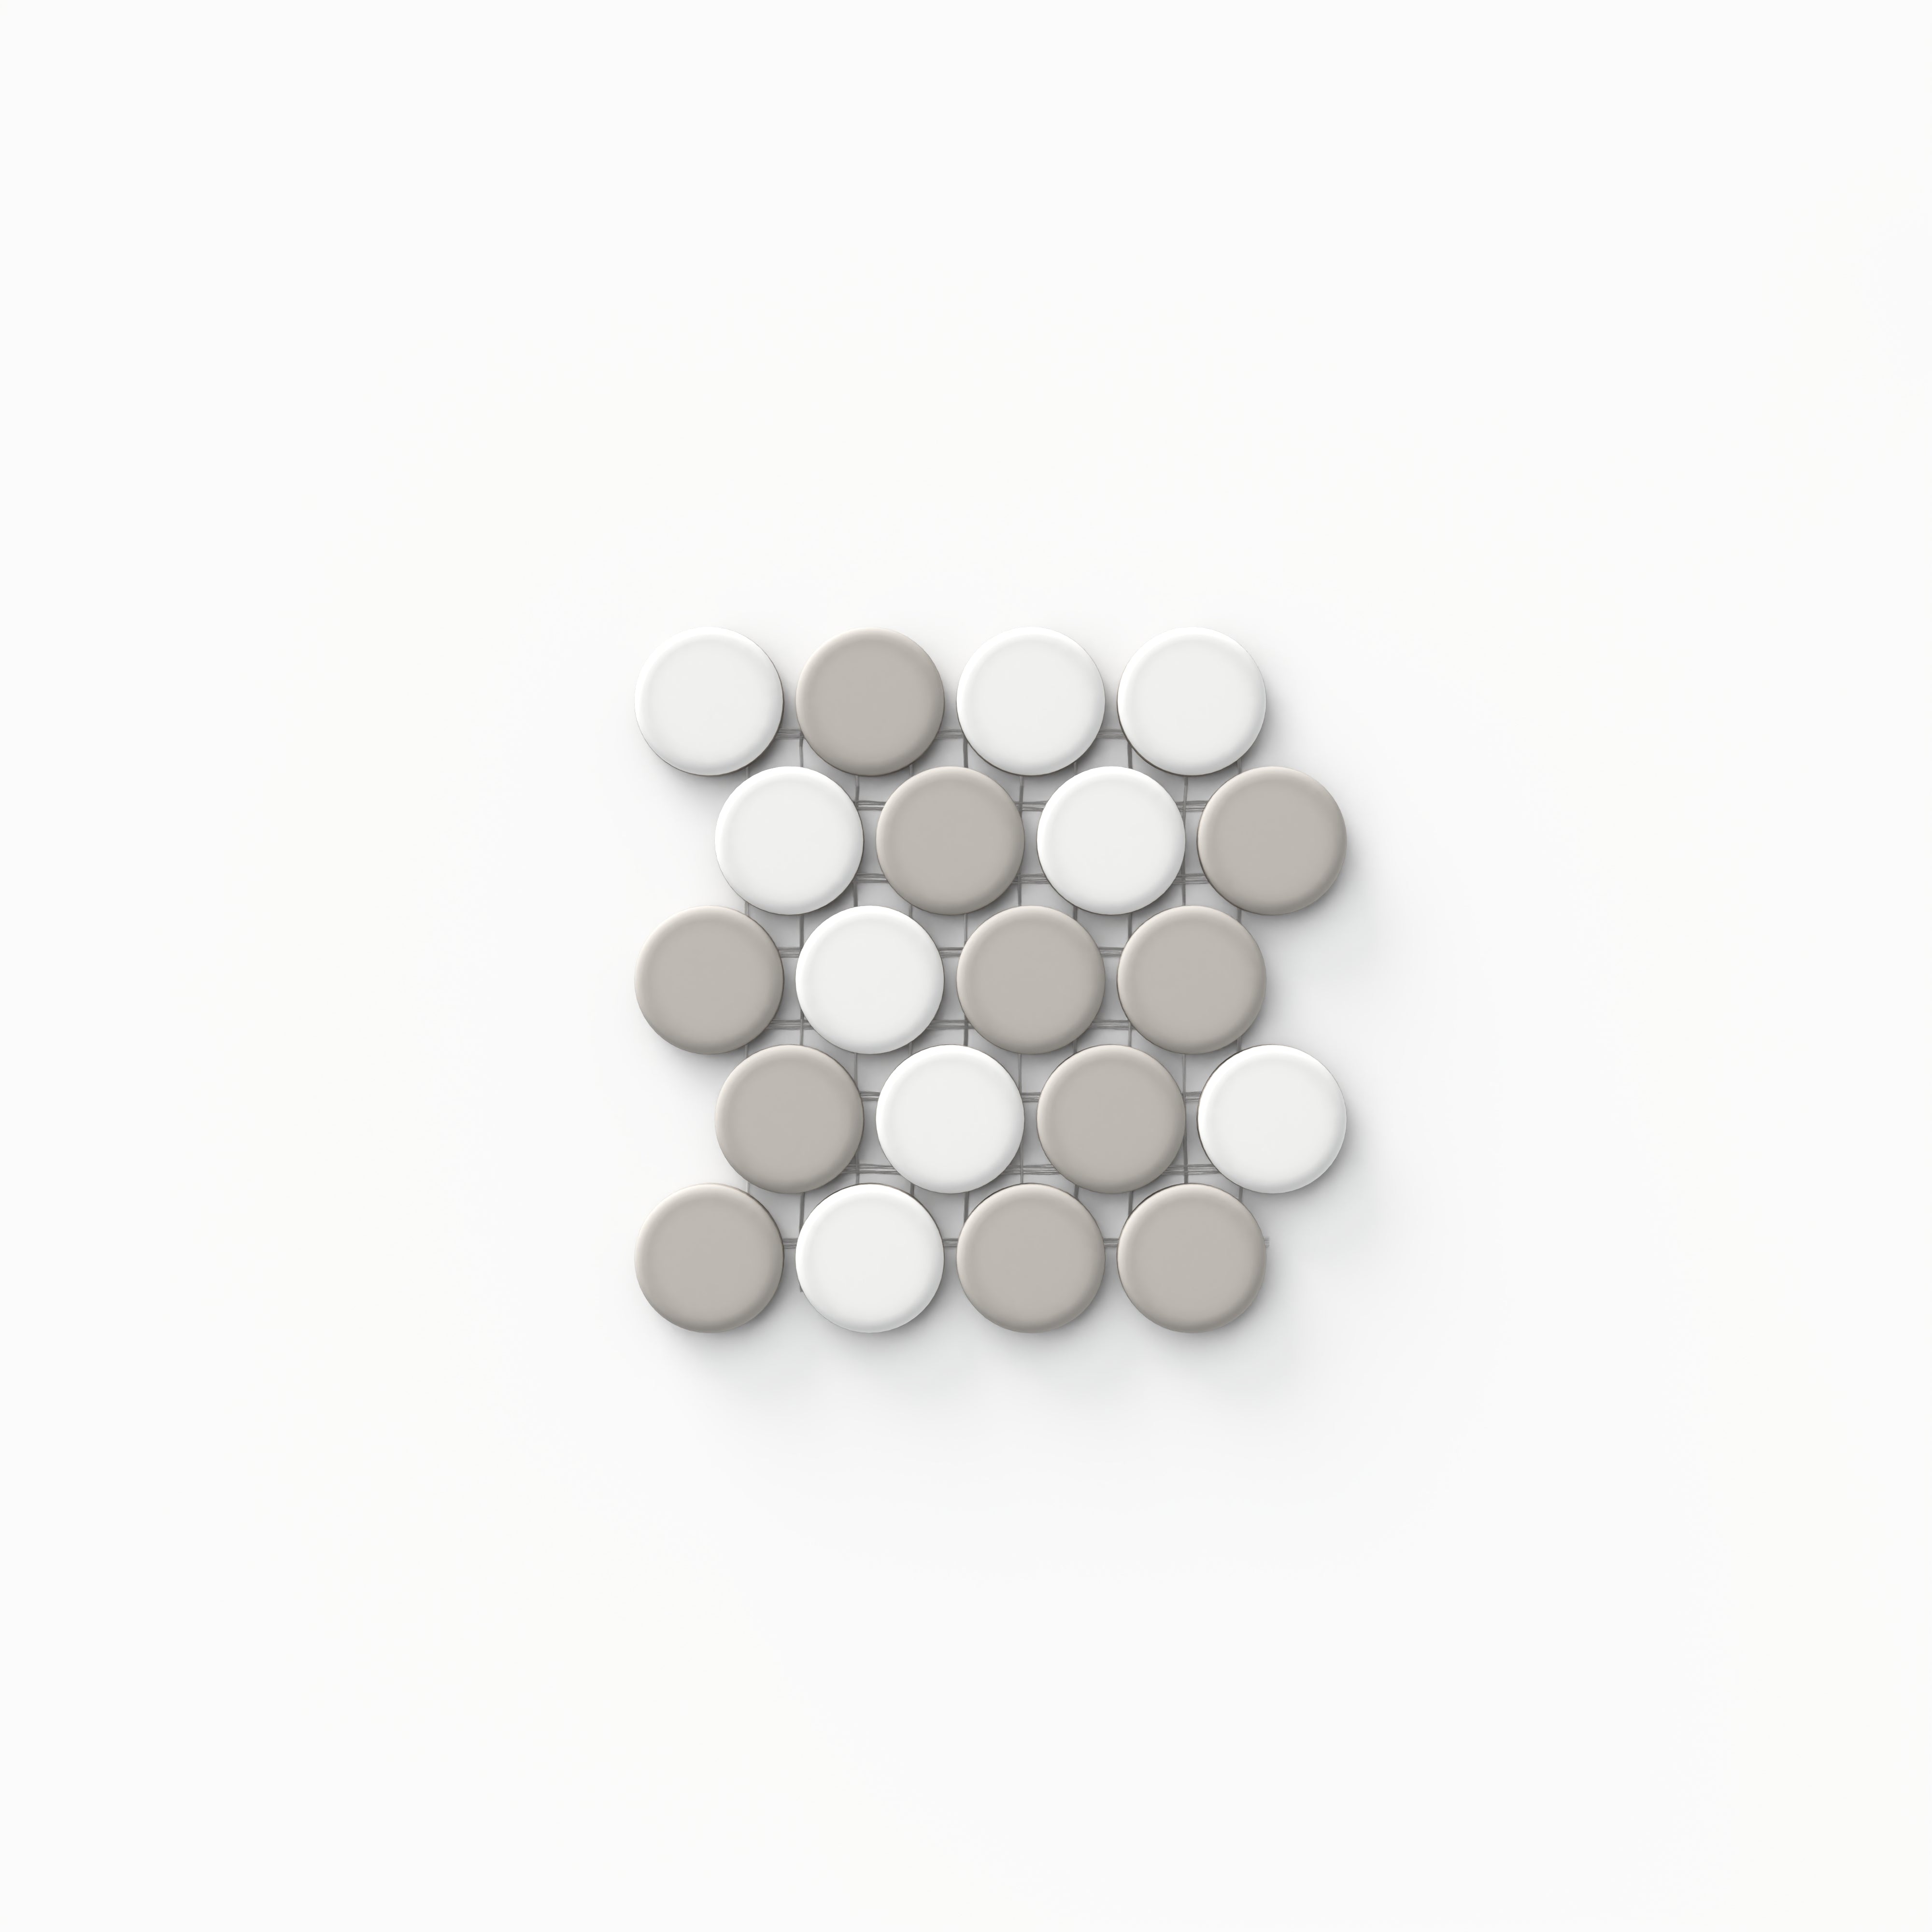 Quinn 10x9 Matte Porcelain Penny Round Mosaic Tile in Grey & White Mix Sample